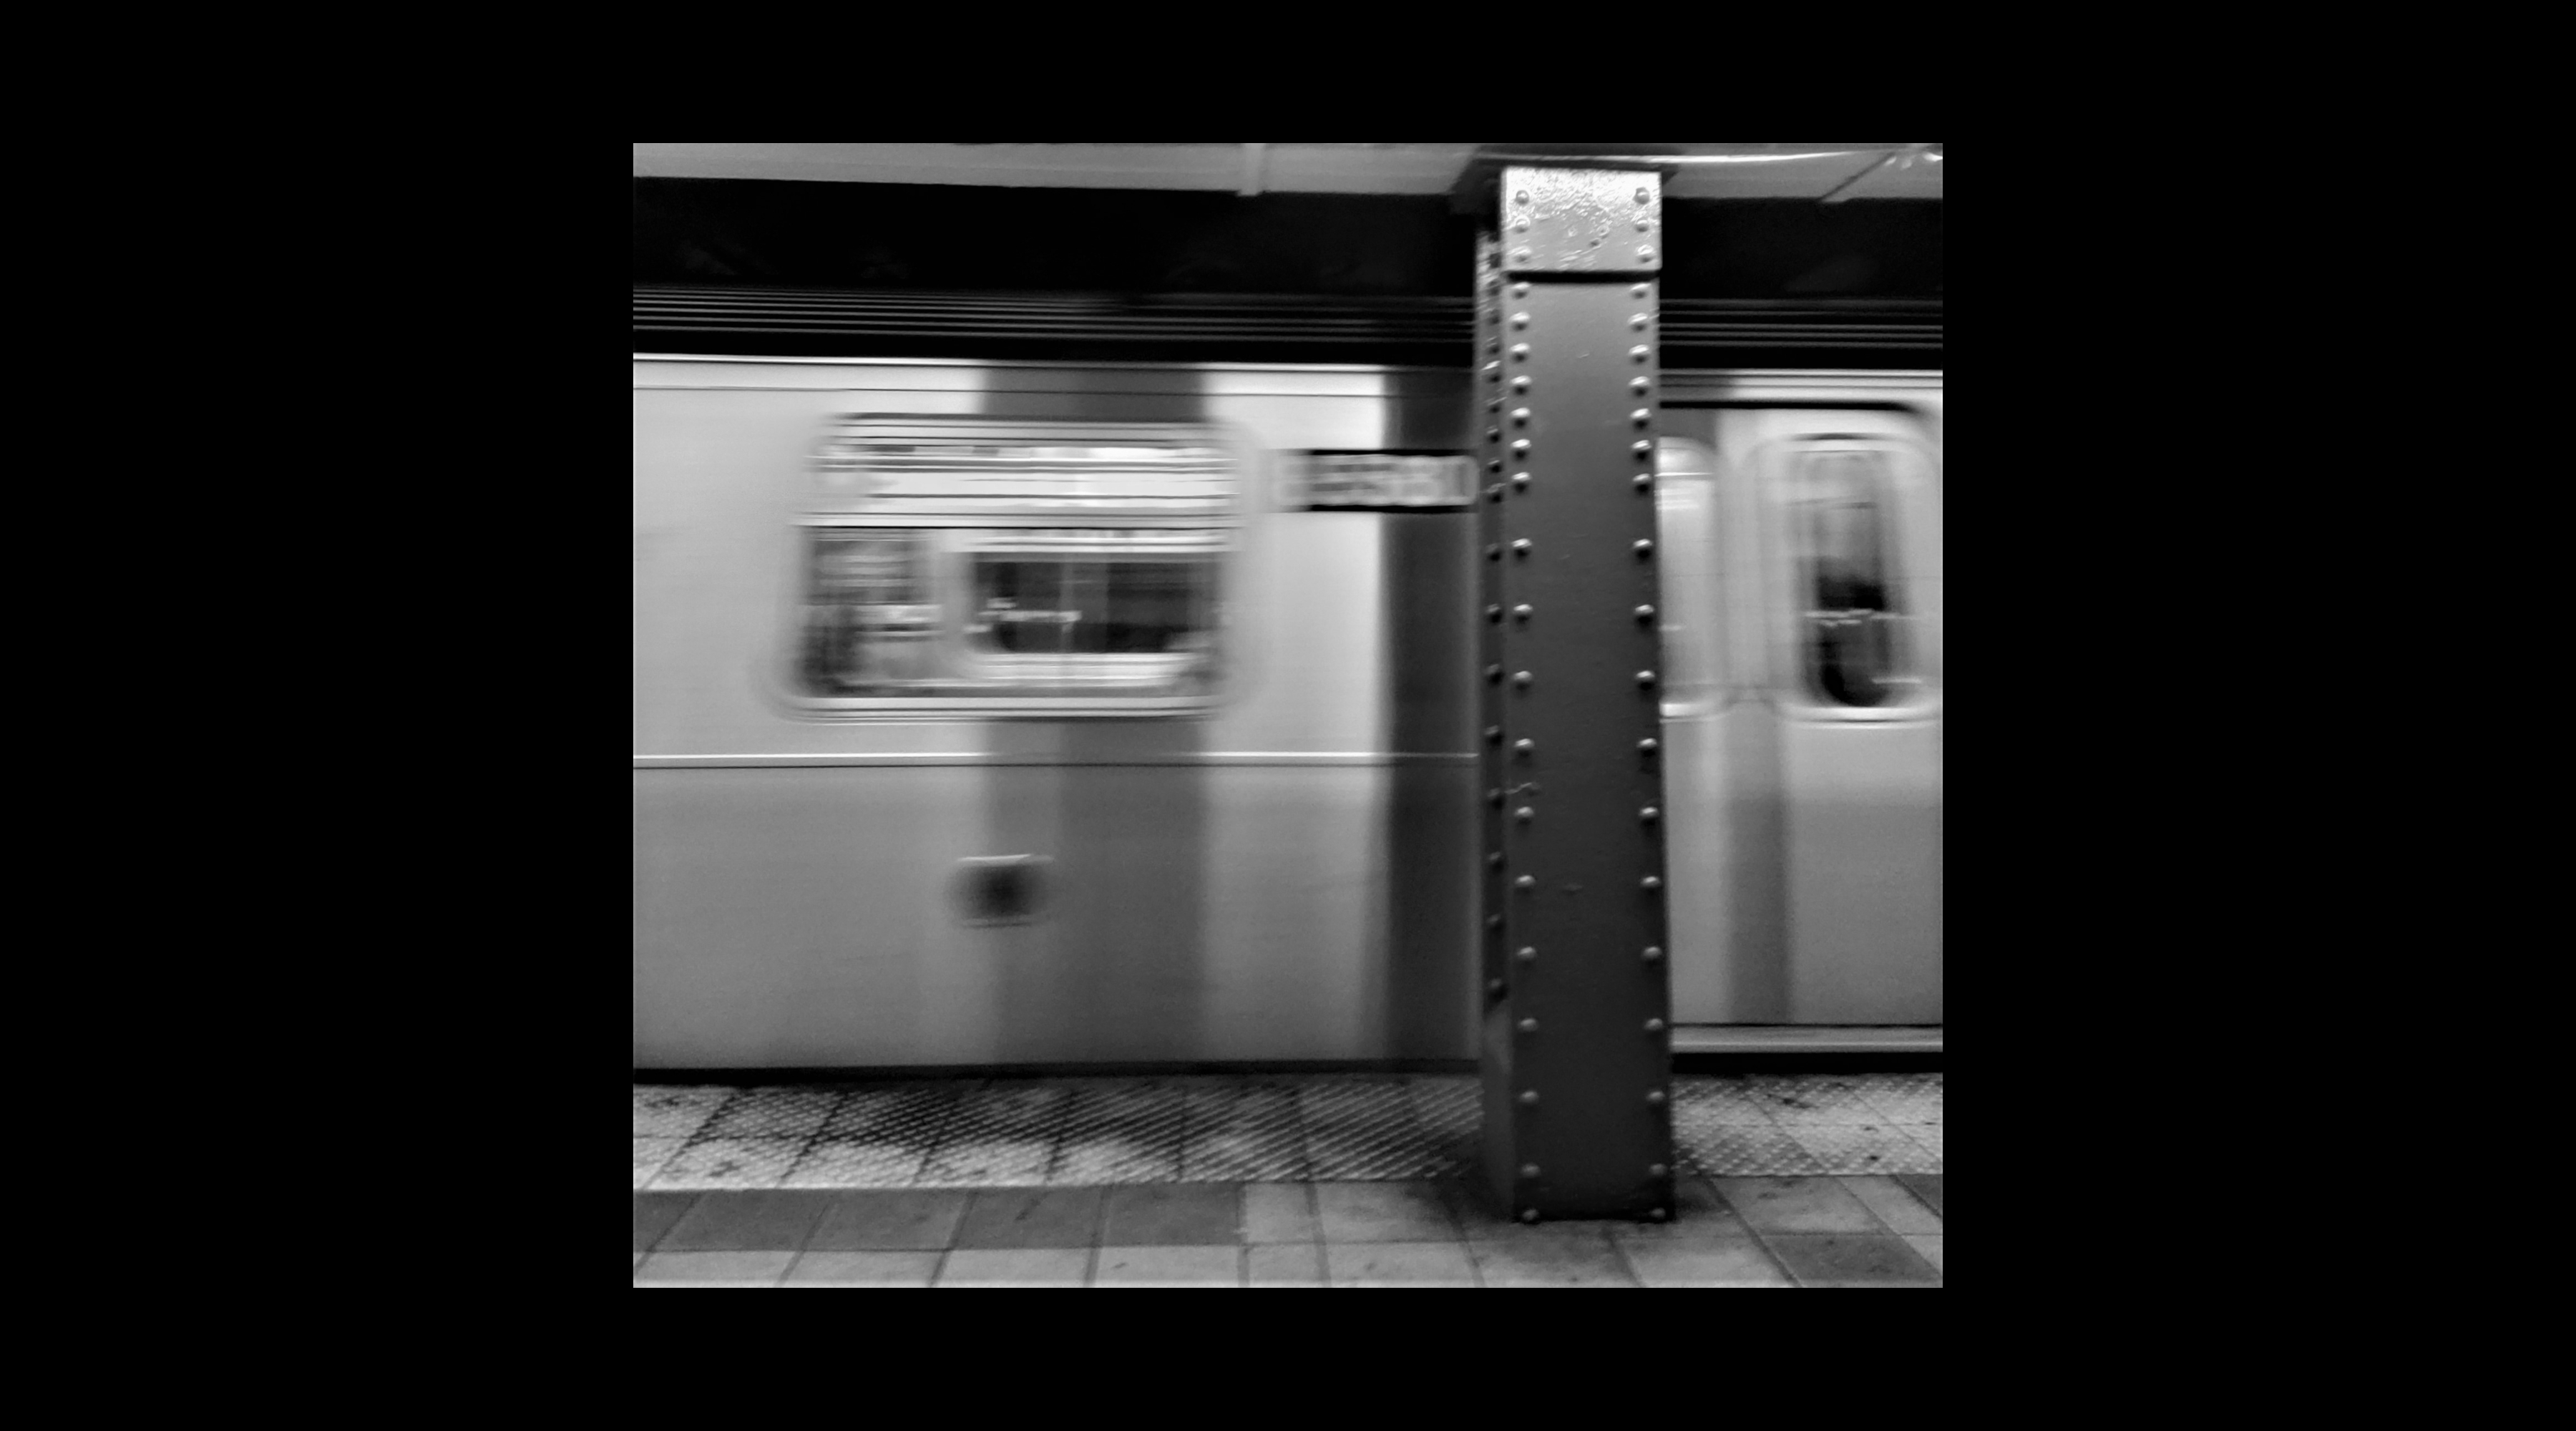 A subway platform, with a moving train (in black and white)